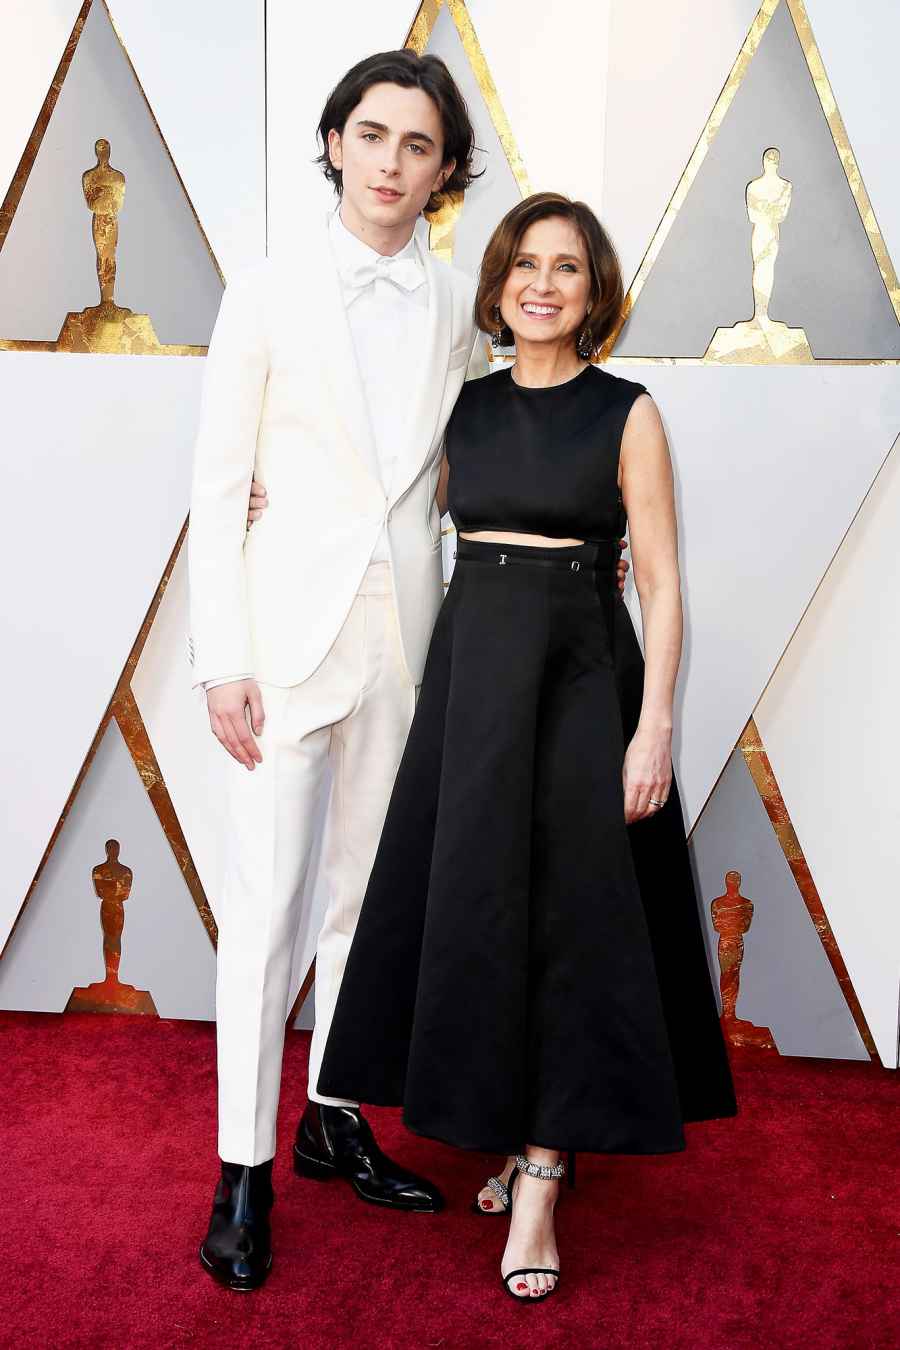 Timothee Chalamet and Nicole Flender Hottest Oscars Duos, Dates and Couples of All Time